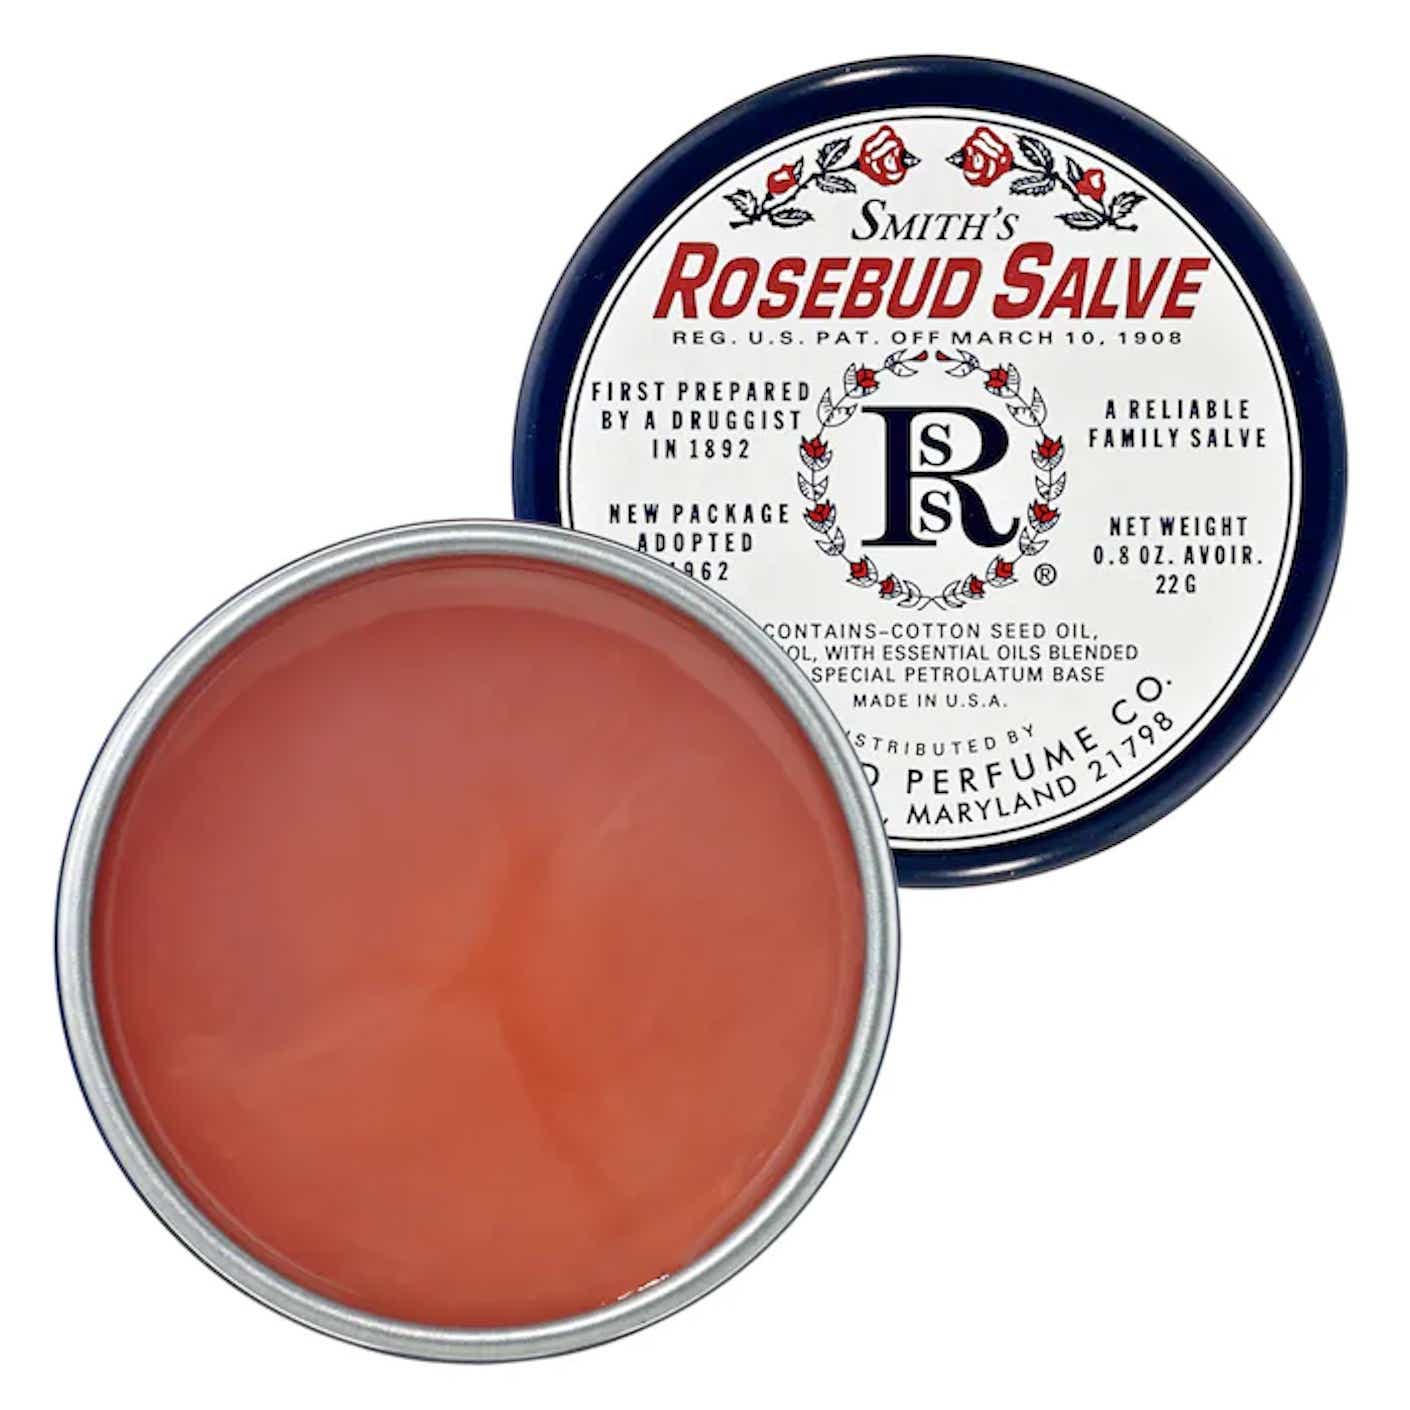 A tin is open to reveal peachy pink salve.